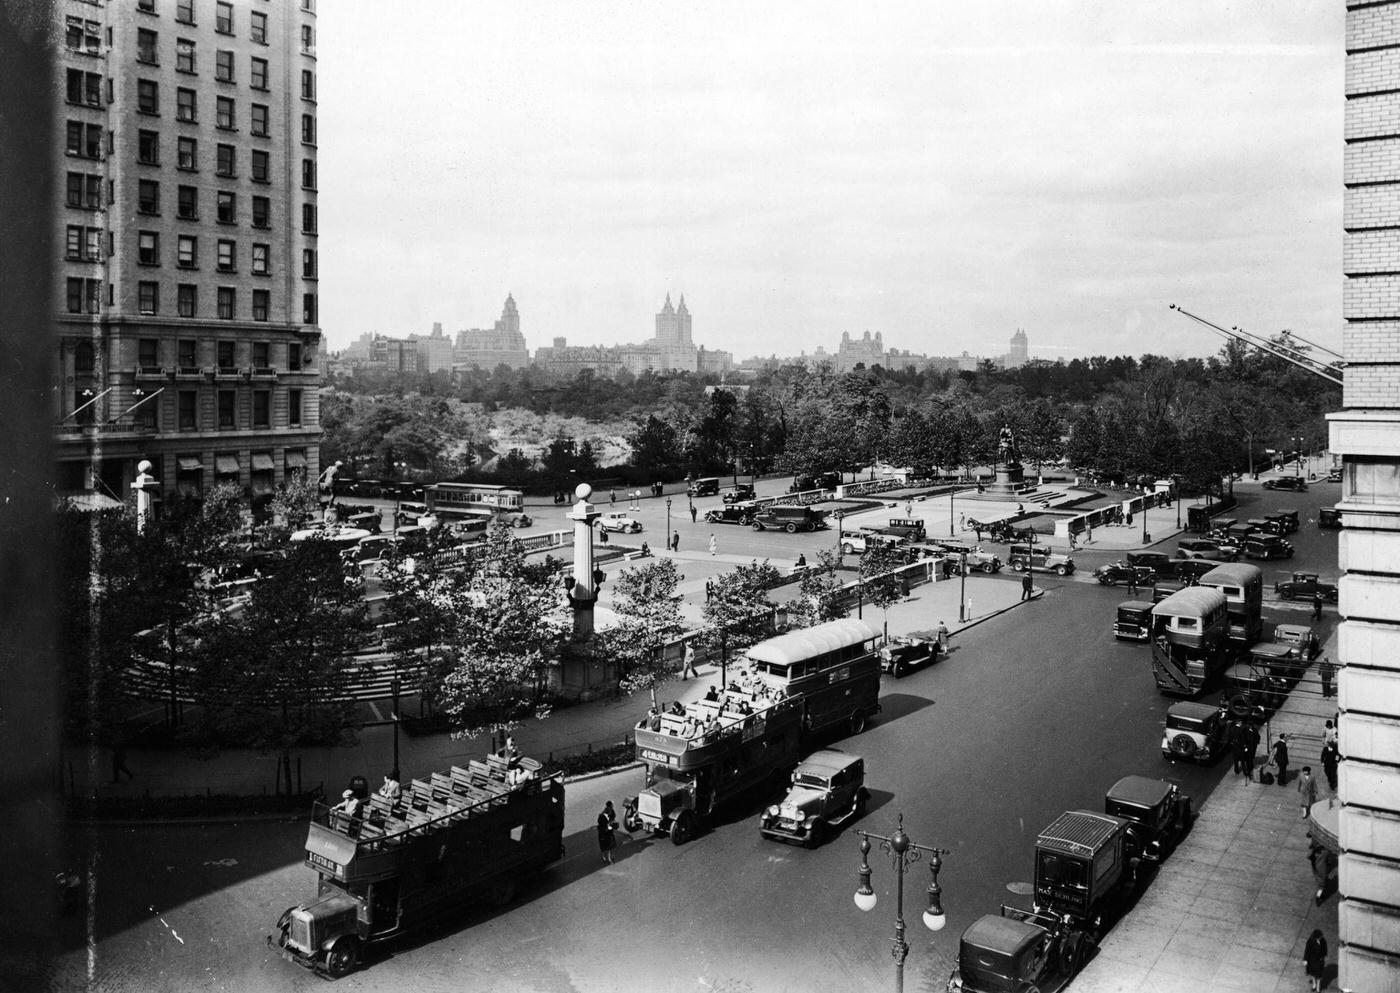 View Of Central Park From Southwest Corner Looking North, Plaza Hotel Visible, Circa 1900S